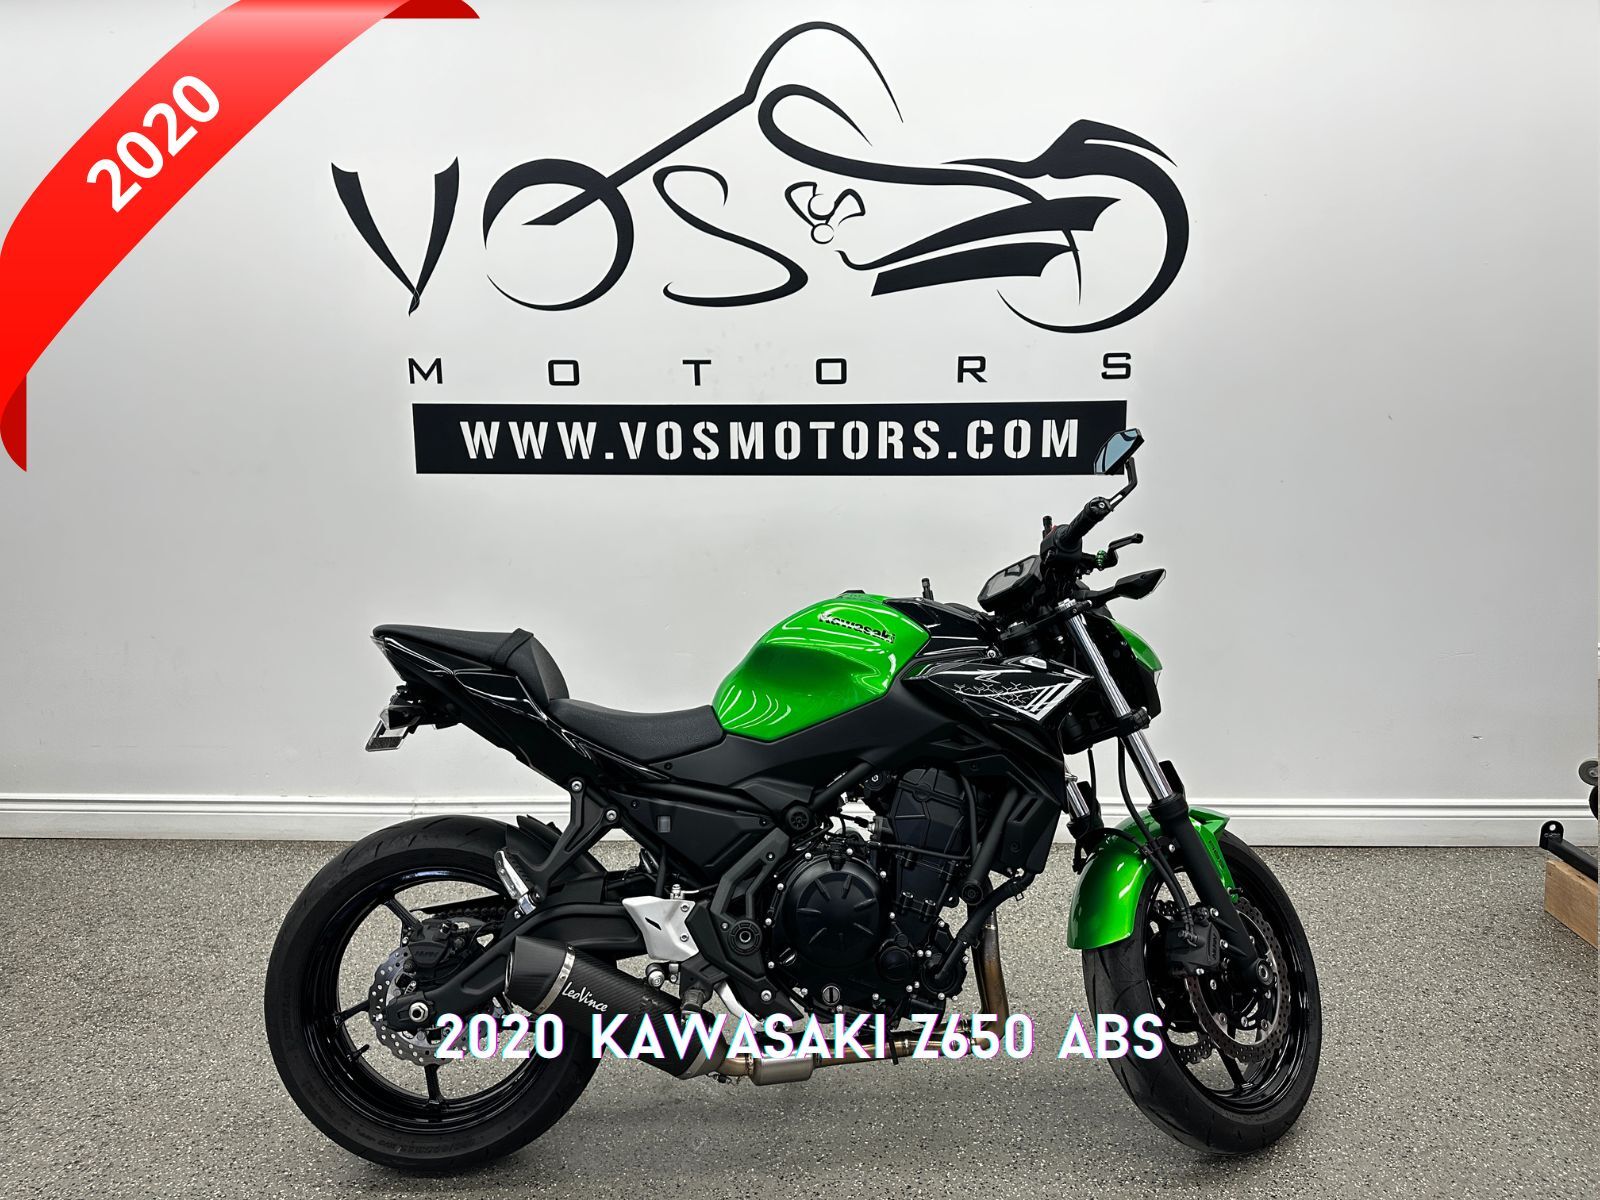 2020 Kawasaki ER650KLF Z650 ABS - v5797NP - -No Payments for 1 Year**